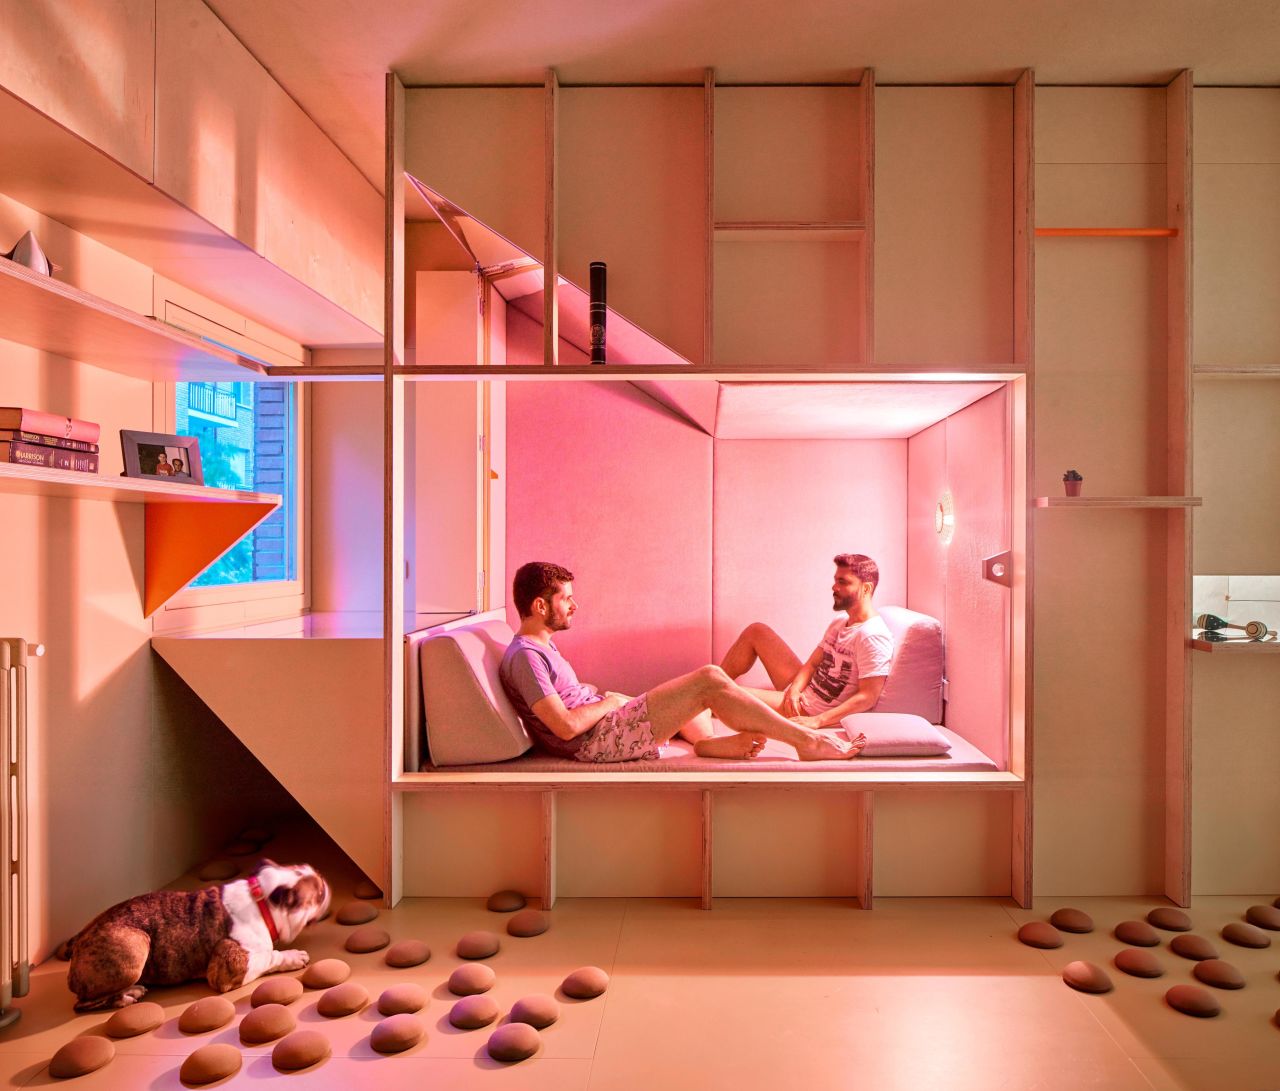 <strong>A Guy, a Bulldog, a Vegetable Garden and the Home They Share, Madrid, Spain, Husos Arquitecturas (2018) -- </strong>This doctor's apartment conversion was tailored to the needs of his demanding shift work, and his dog. The space was opened up, introducing more light and cooler temperatures, and nooks and surfaces made multifunctional. Graywater from the shower is collected and used in the balcony garden.